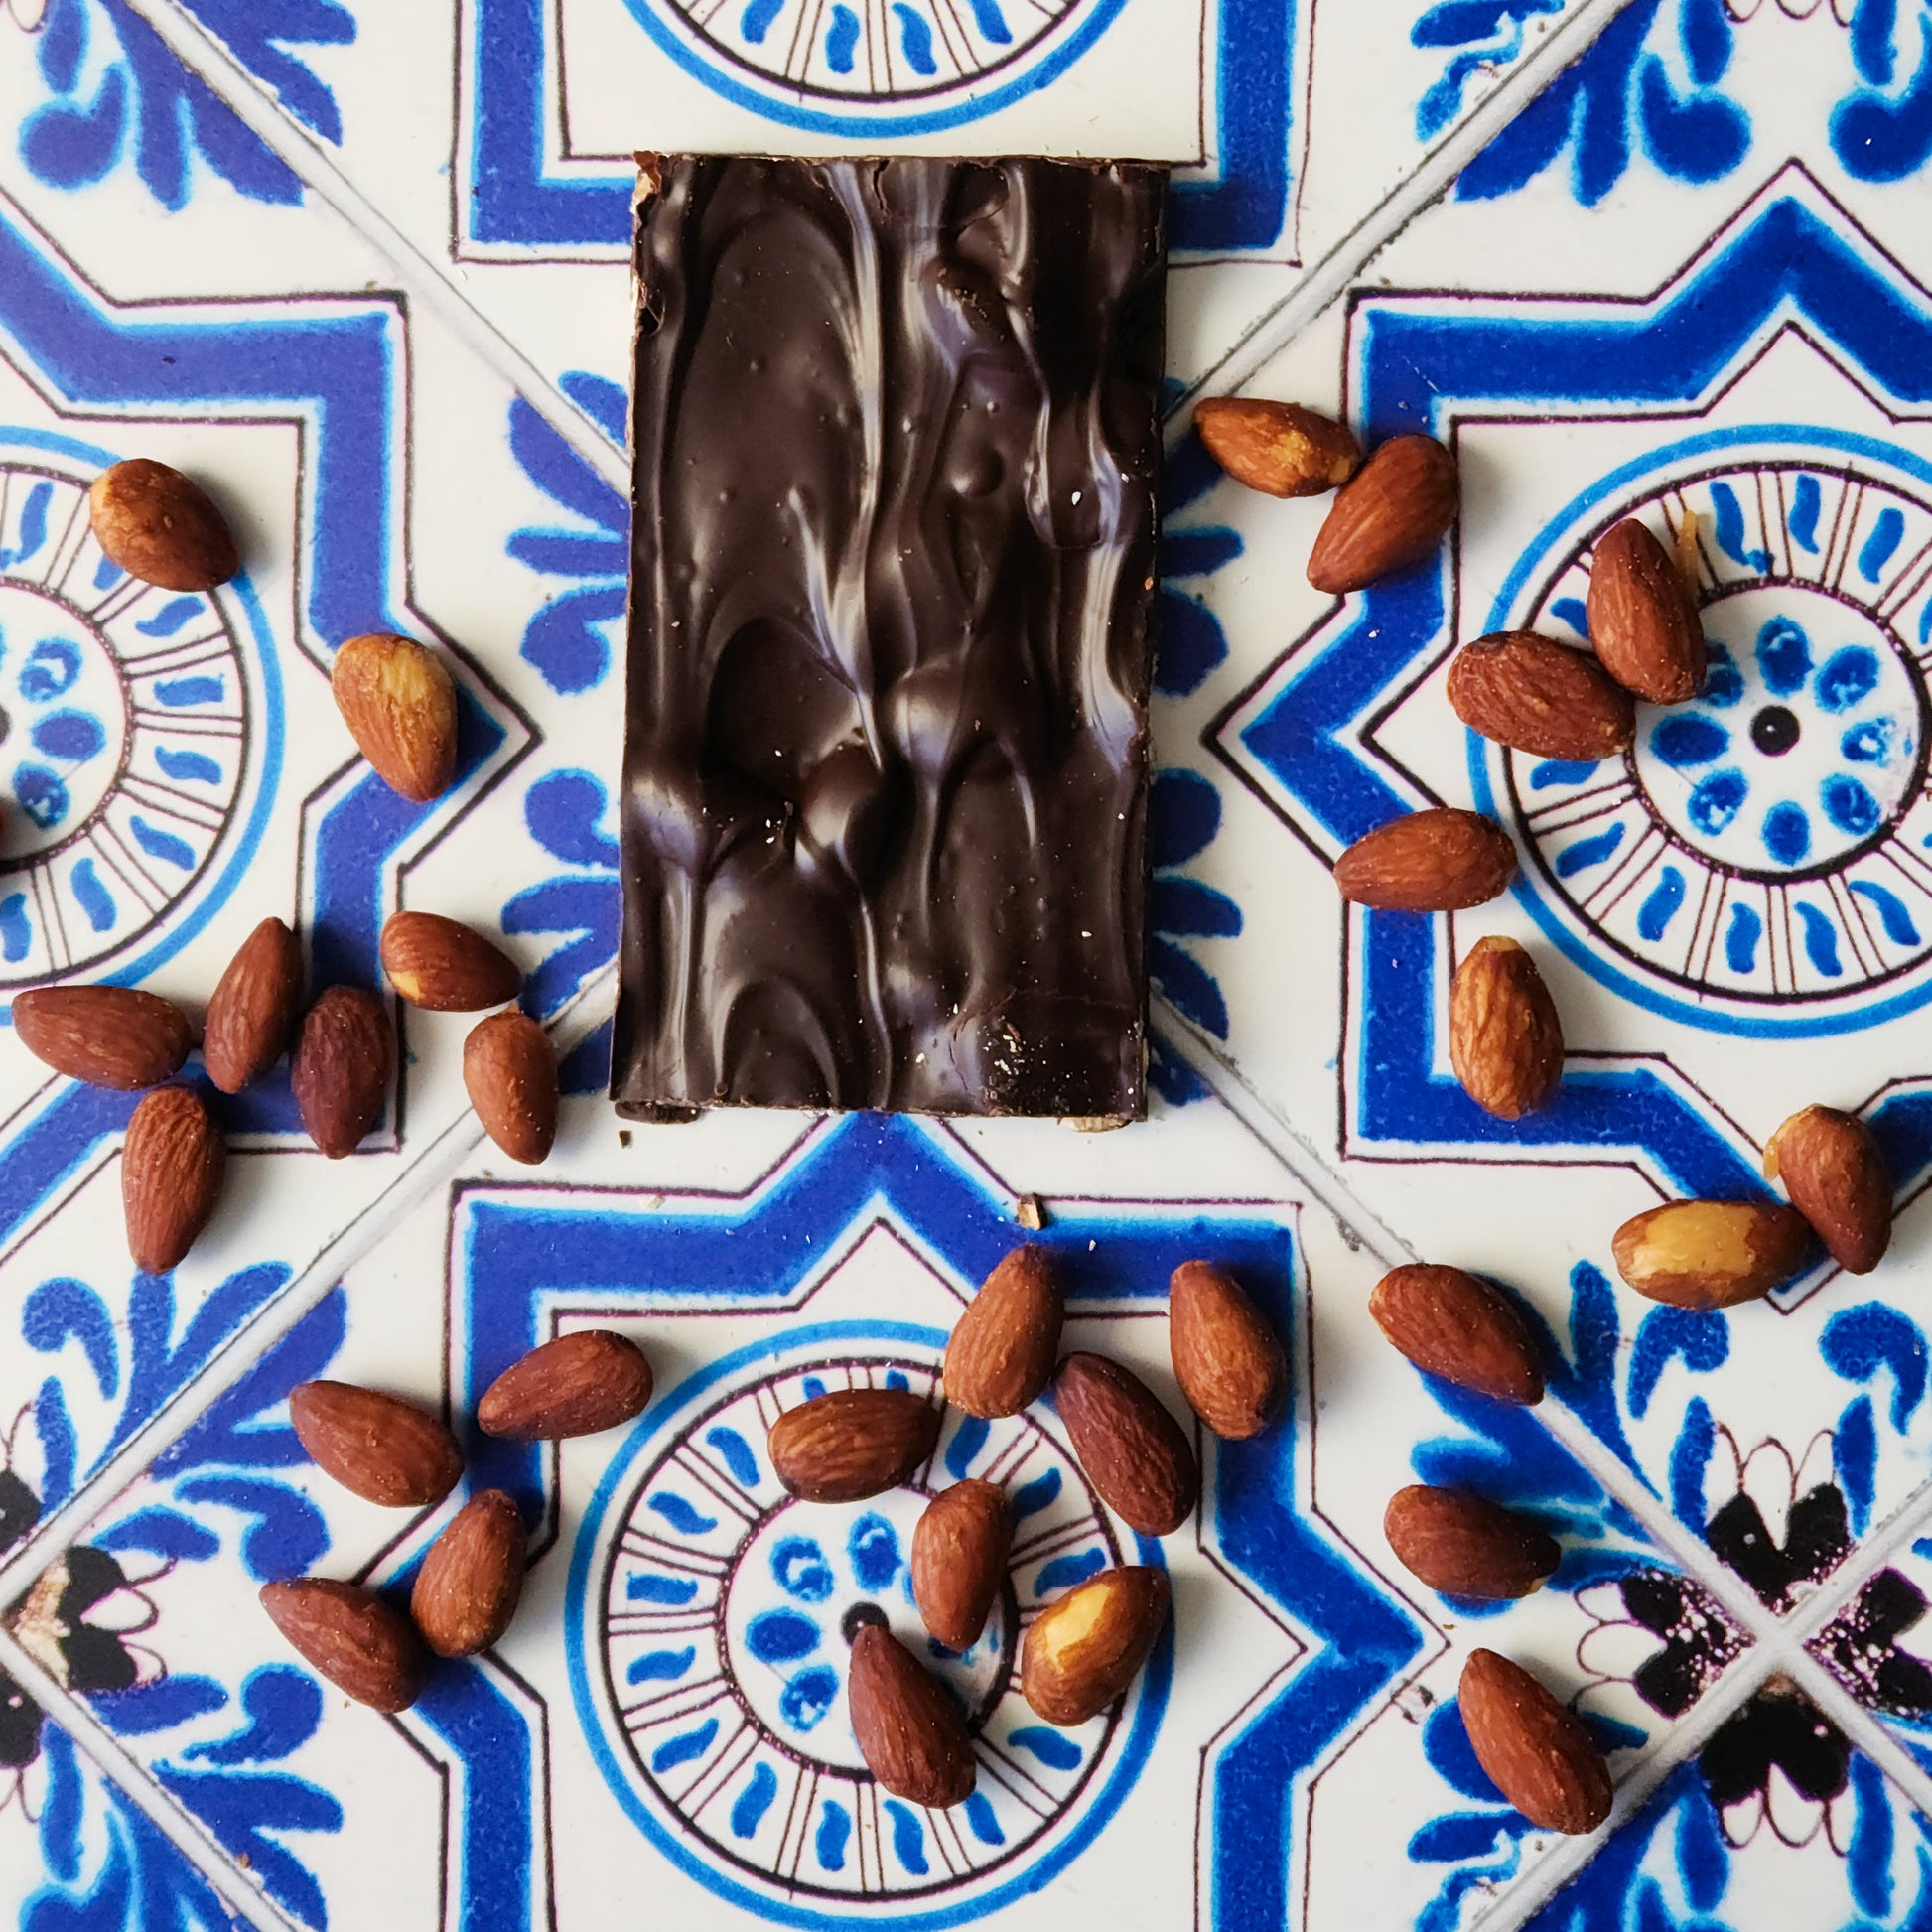 Dark Chocolate mixed with salted almonds for a crunchy treat.